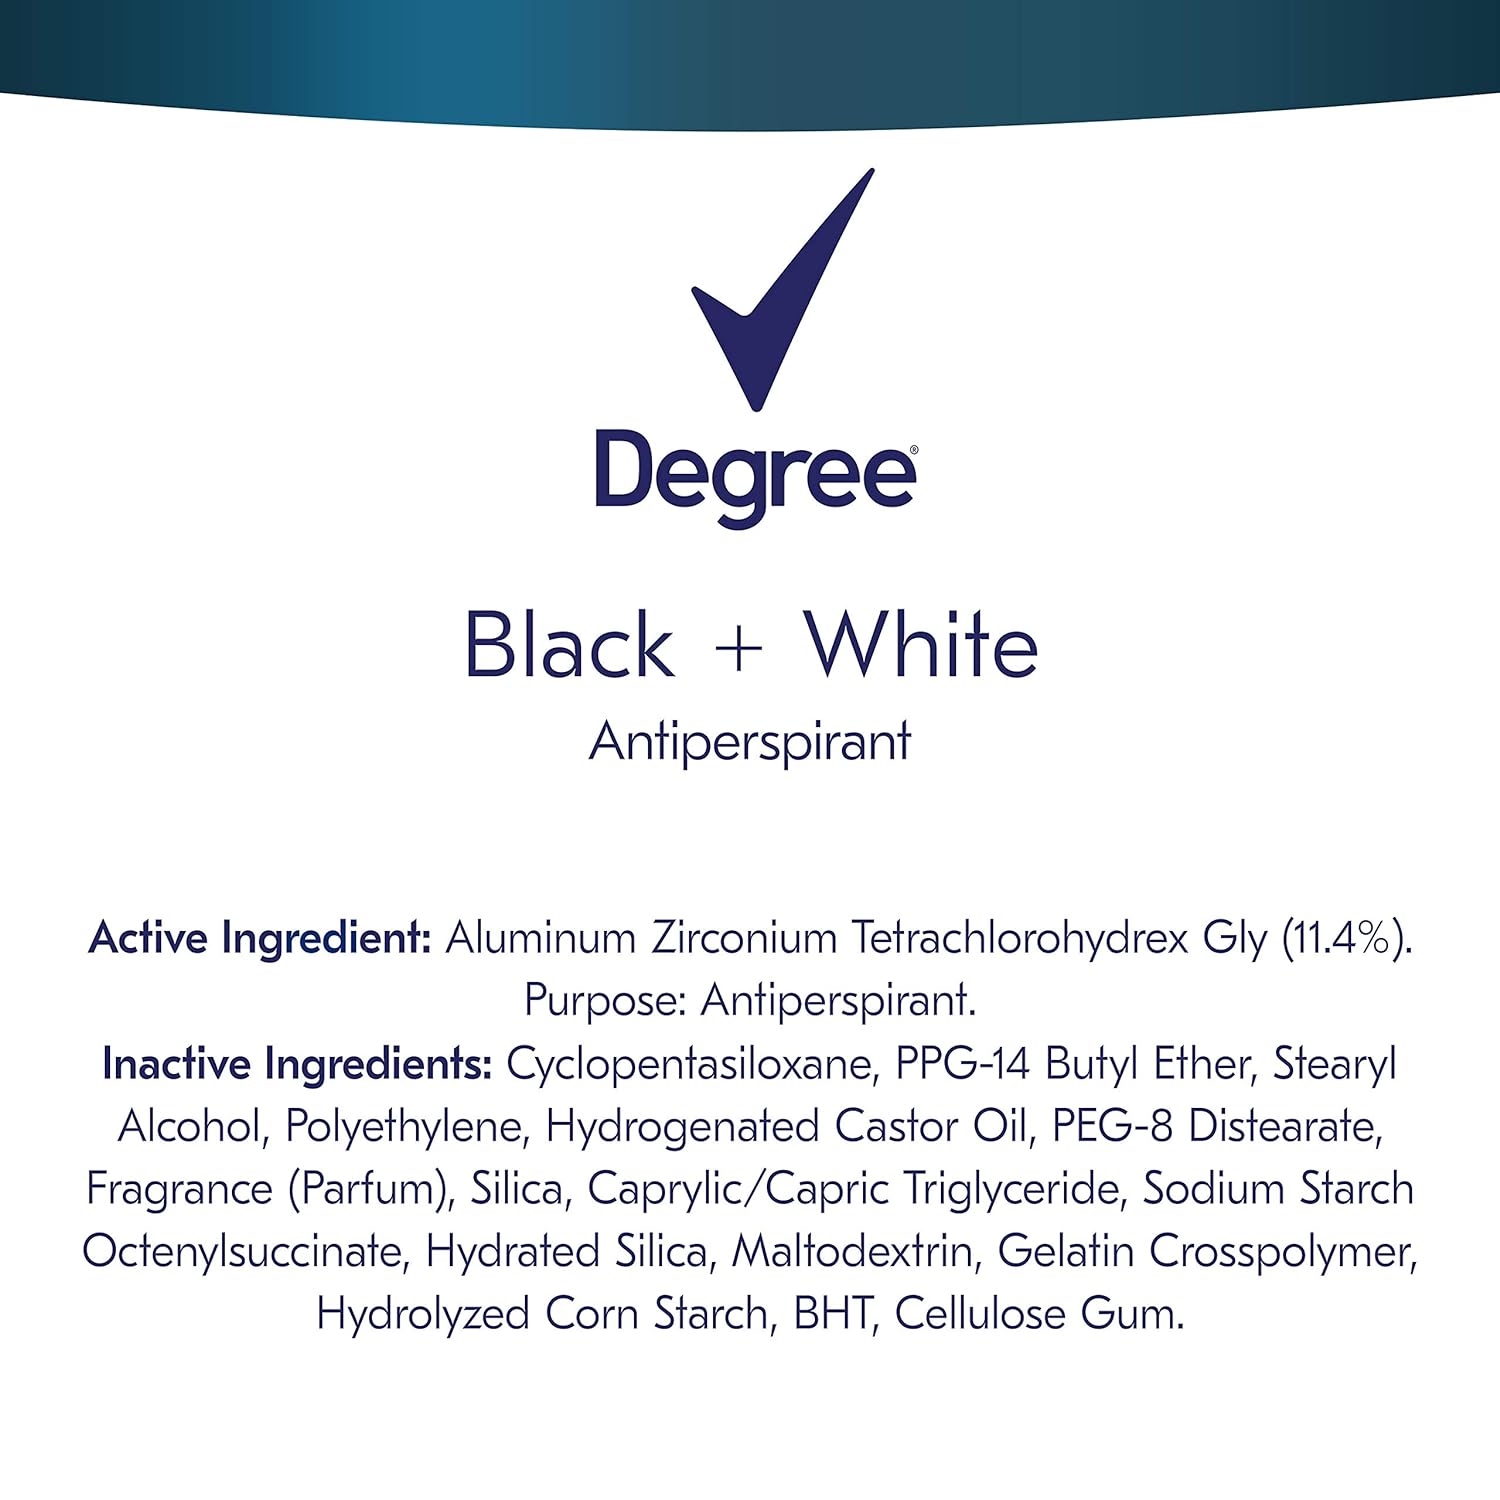  Degree Men UltraClear Antiperspirant Protects from Deodorant Stains Black + White Mens Deodorant 2.7 oz, 4 Count